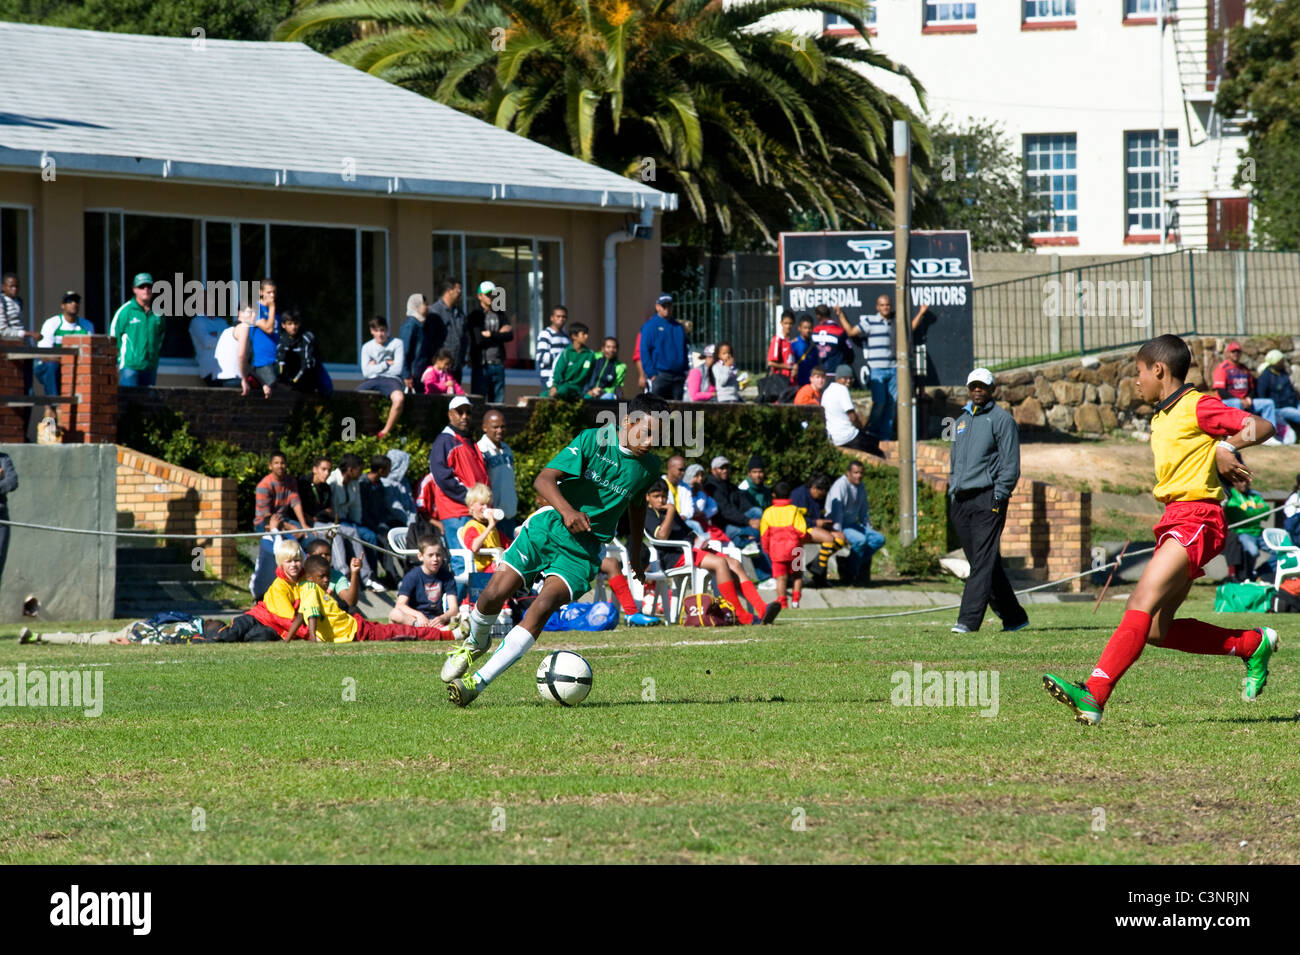 Striker and defender of an U13 football team in a match at Cape Town South Africa Stock Photo